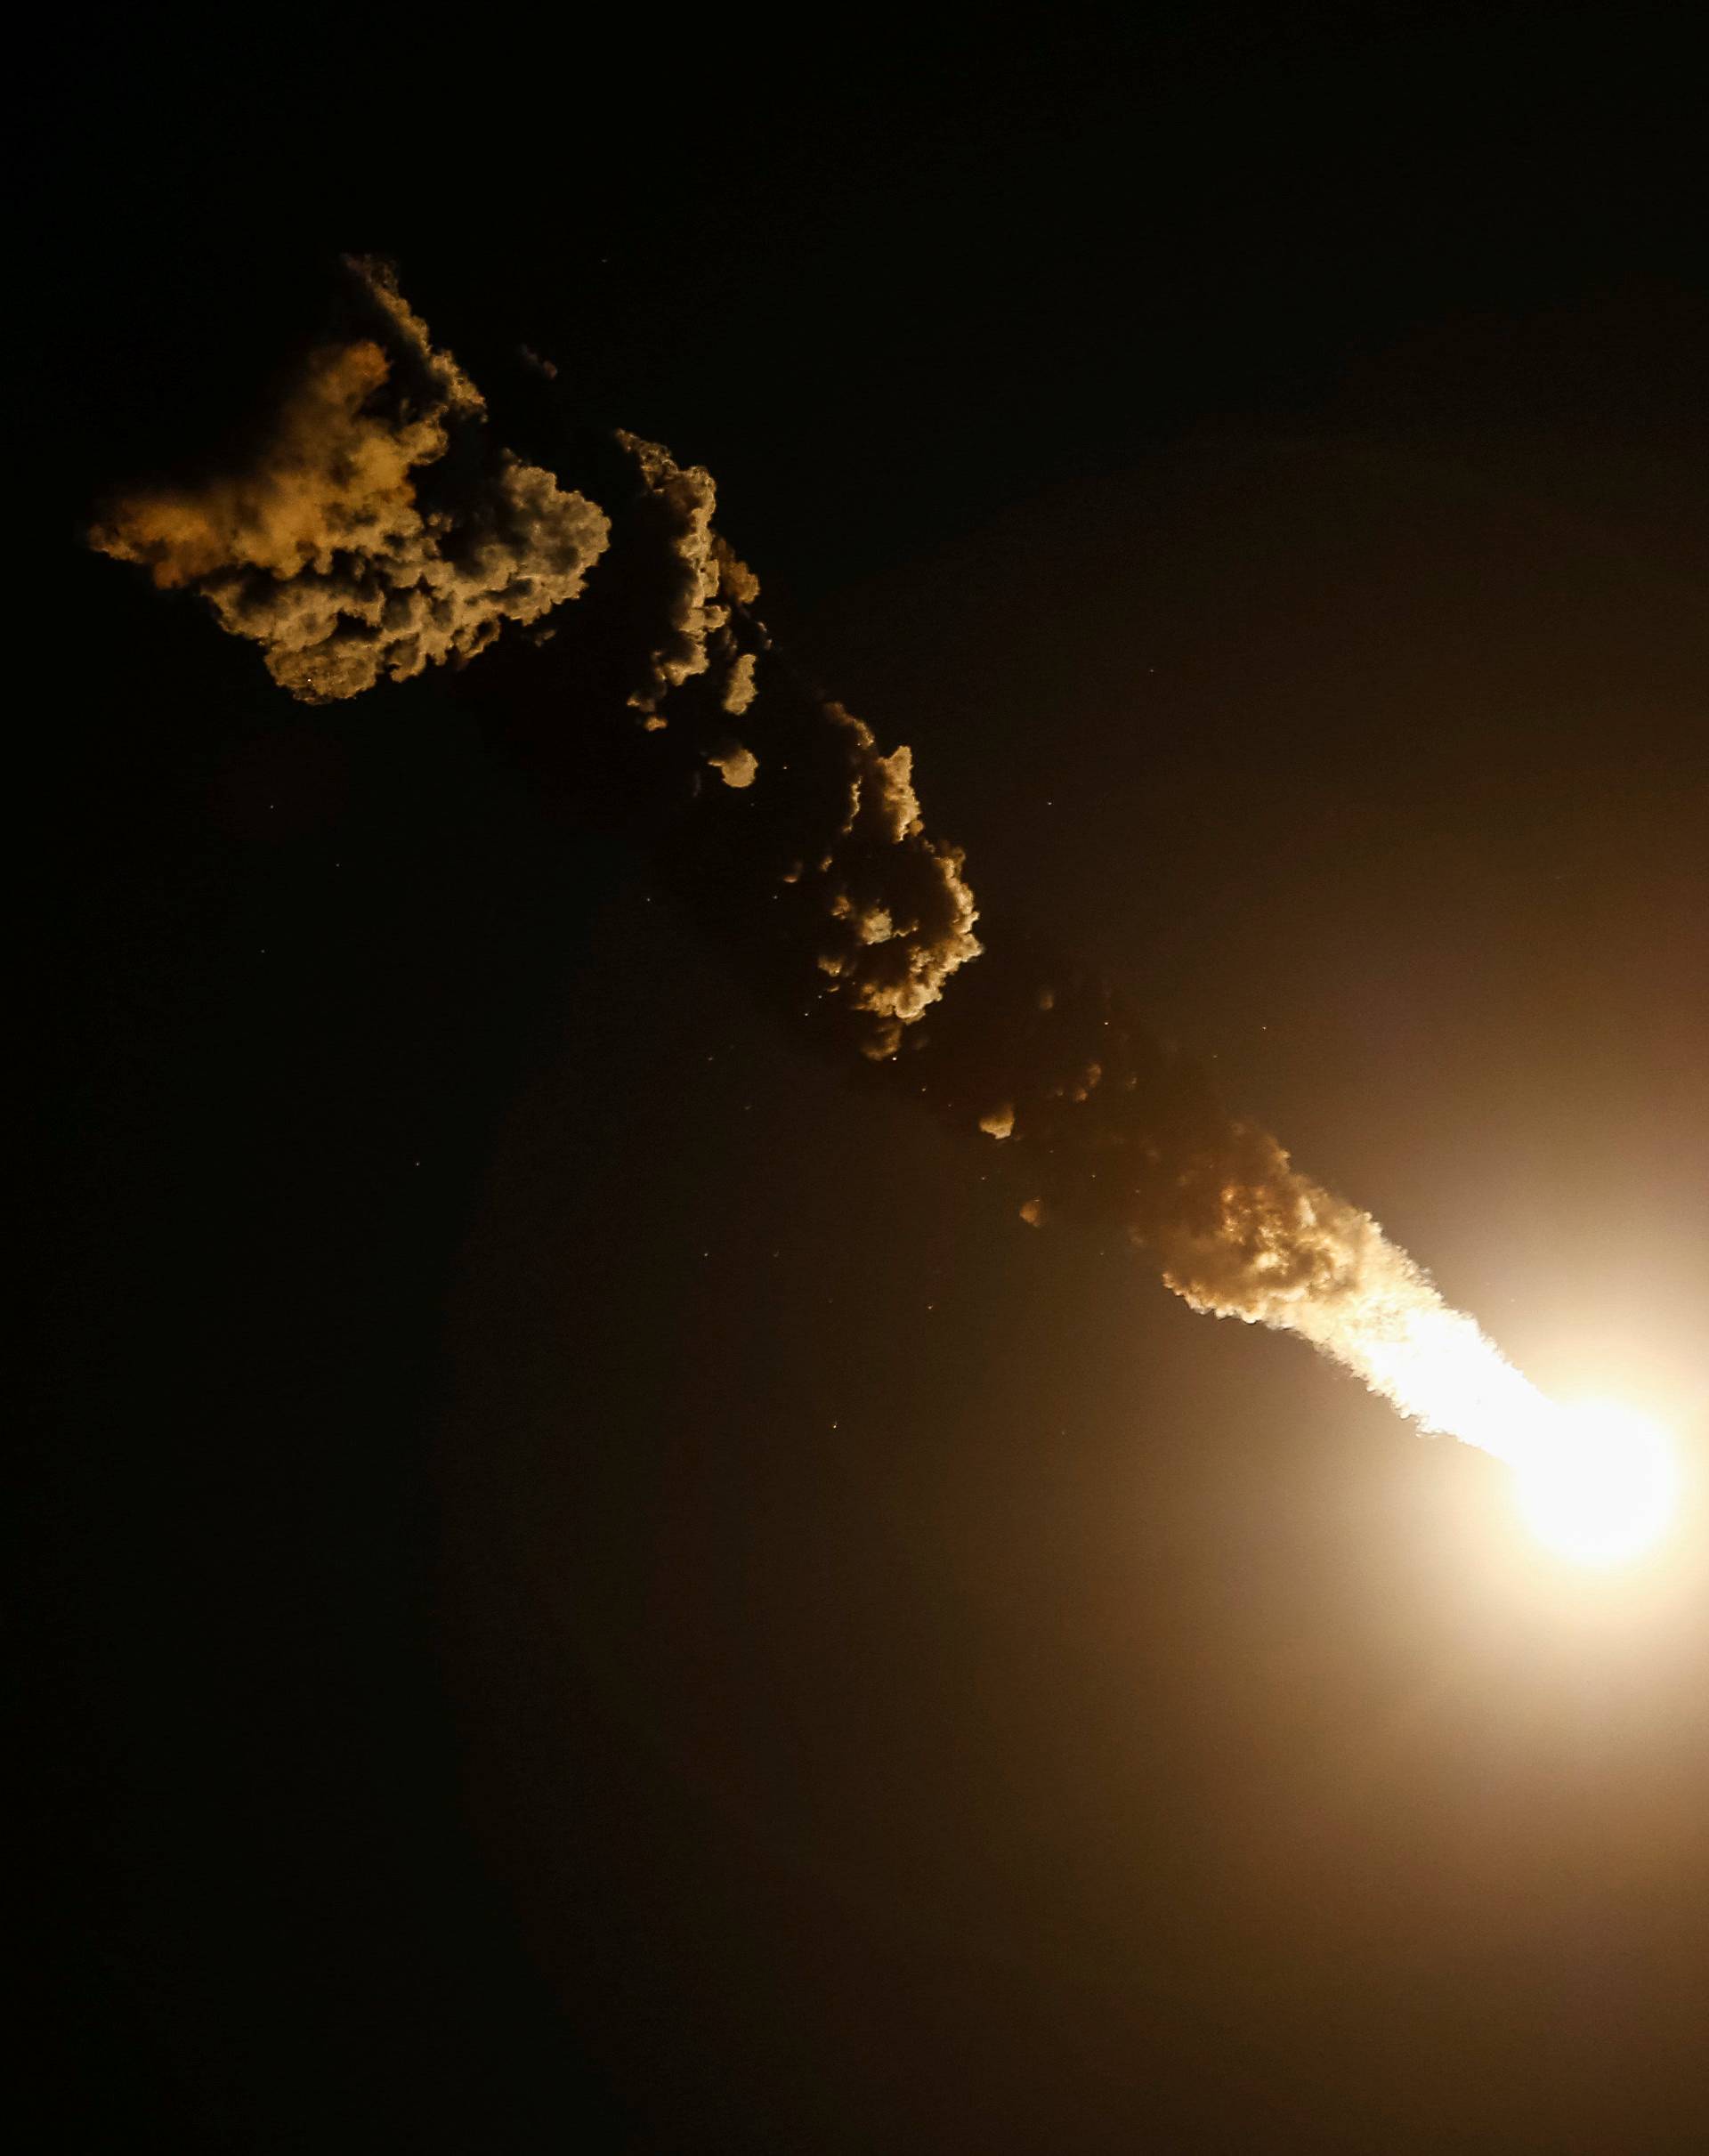 The Soyuz MS-03 spacecraft carrying the crew of Whitson of the U.S., Novitskiy of Russia and Pesquet of France blasts off to the International Space Station (ISS) from the launchpad at the Baikonur cosmodrome, Kazakhstan